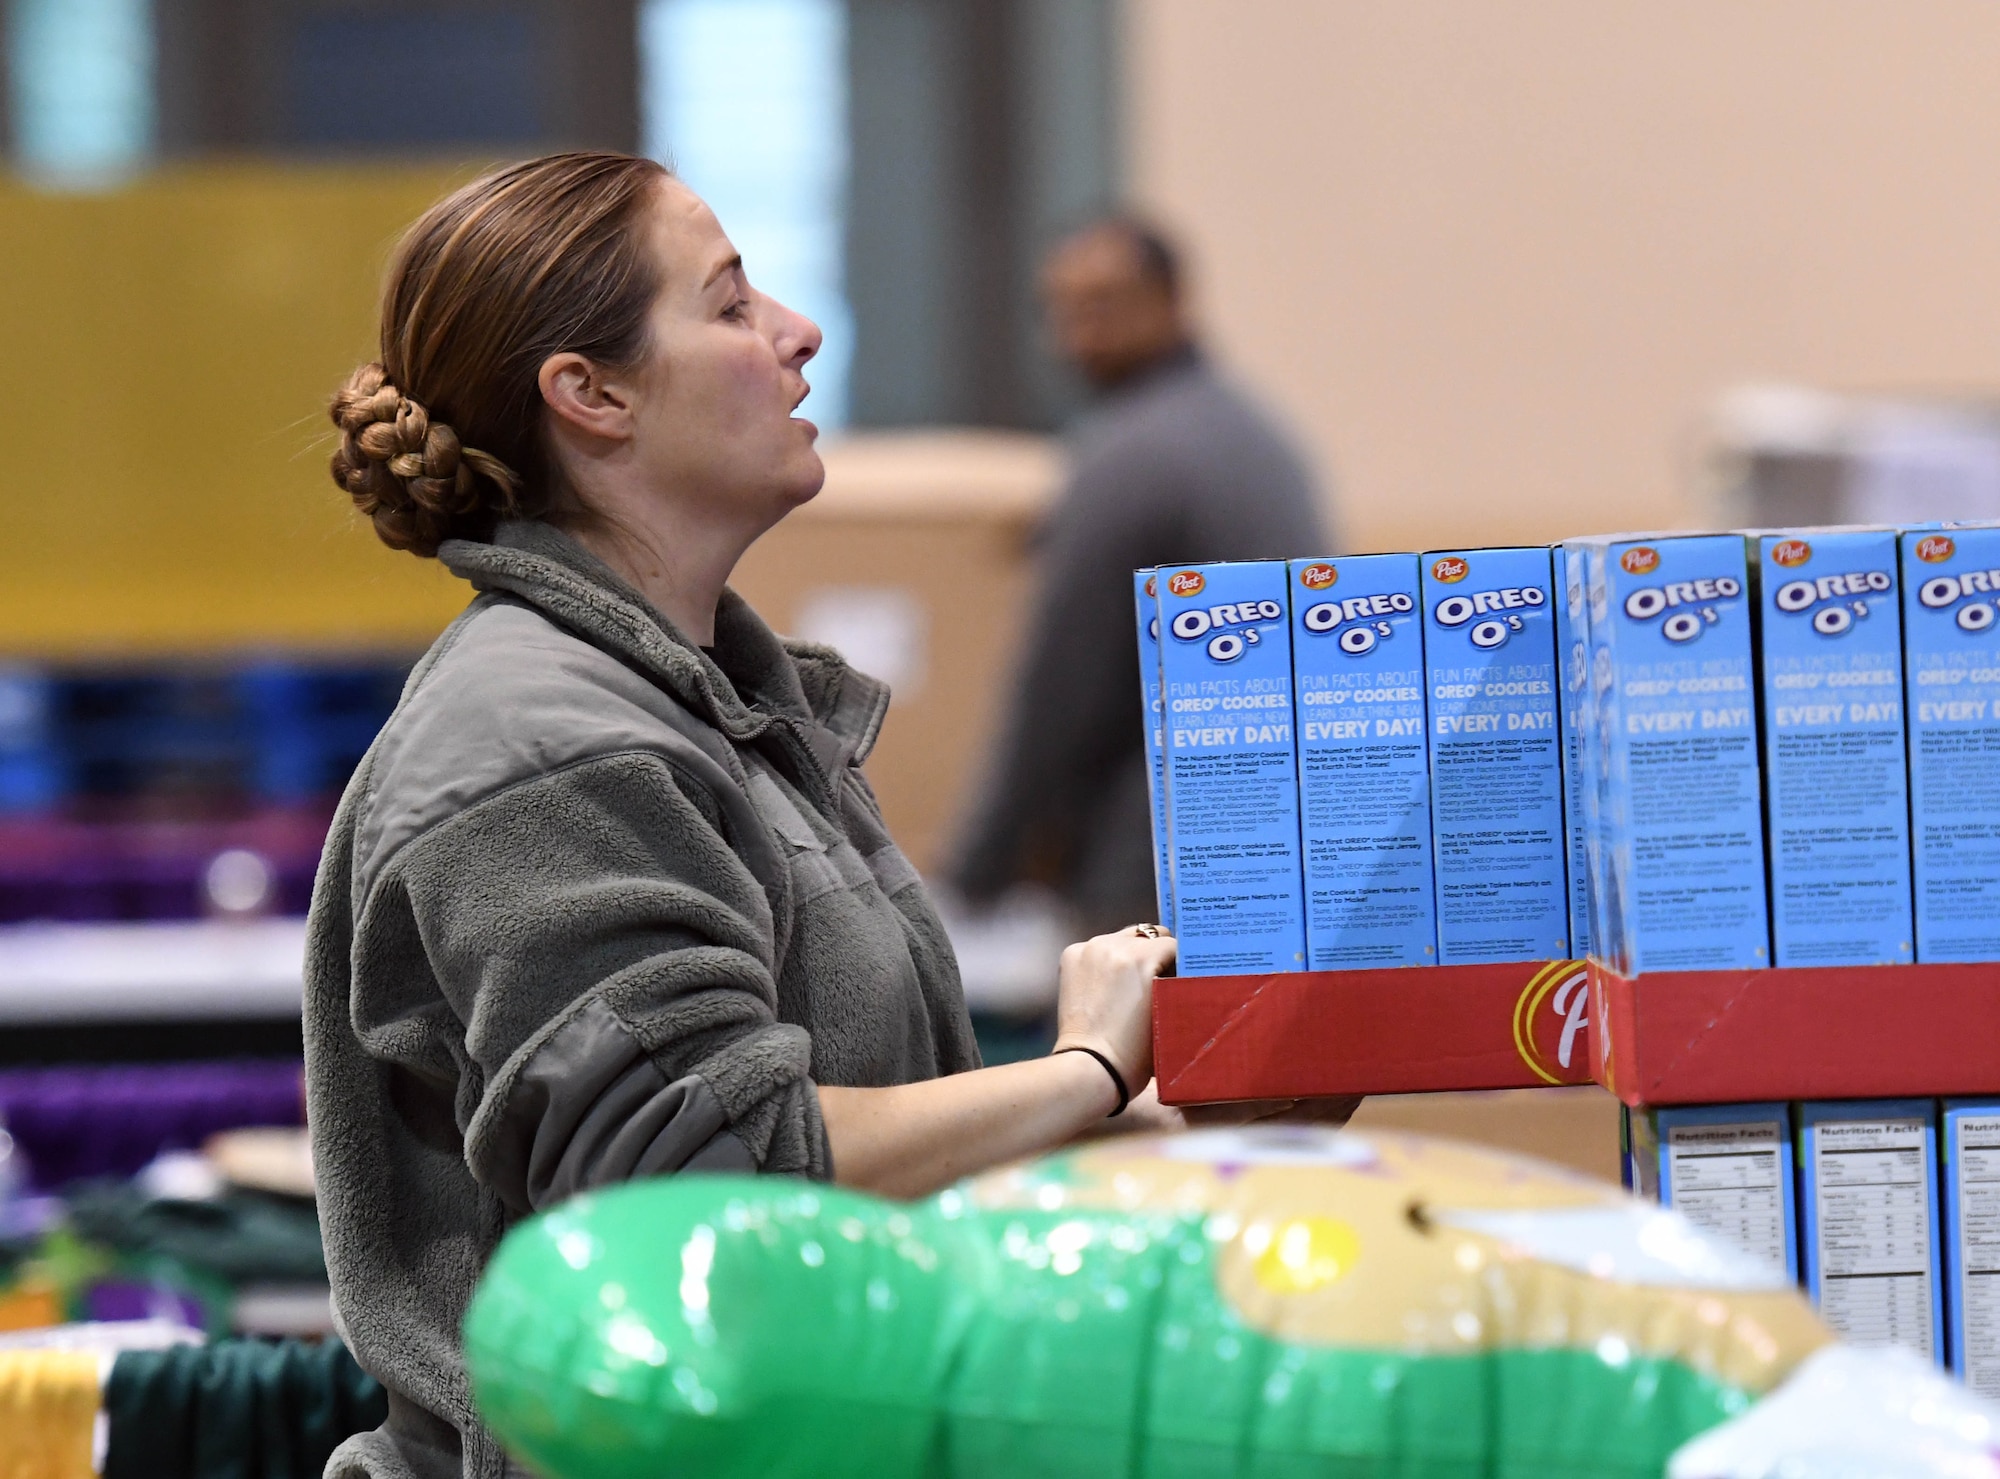 Tech. Sgt. Jennifer Watts, 81st Training Wing command chief executive assistant, packages food items during a food drive at the Mississippi Coast Coliseum and Convention Center Jan. 16, 2018, Biloxi, Mississippi. More than 80 Airmen participated in the wing-level community sponsored volunteer event packaging over 21,000 pounds of food, equating to approximately 17,500 meals that will be provided to hunger relief. (U.S. Air Force photo by Kemberly Groue)